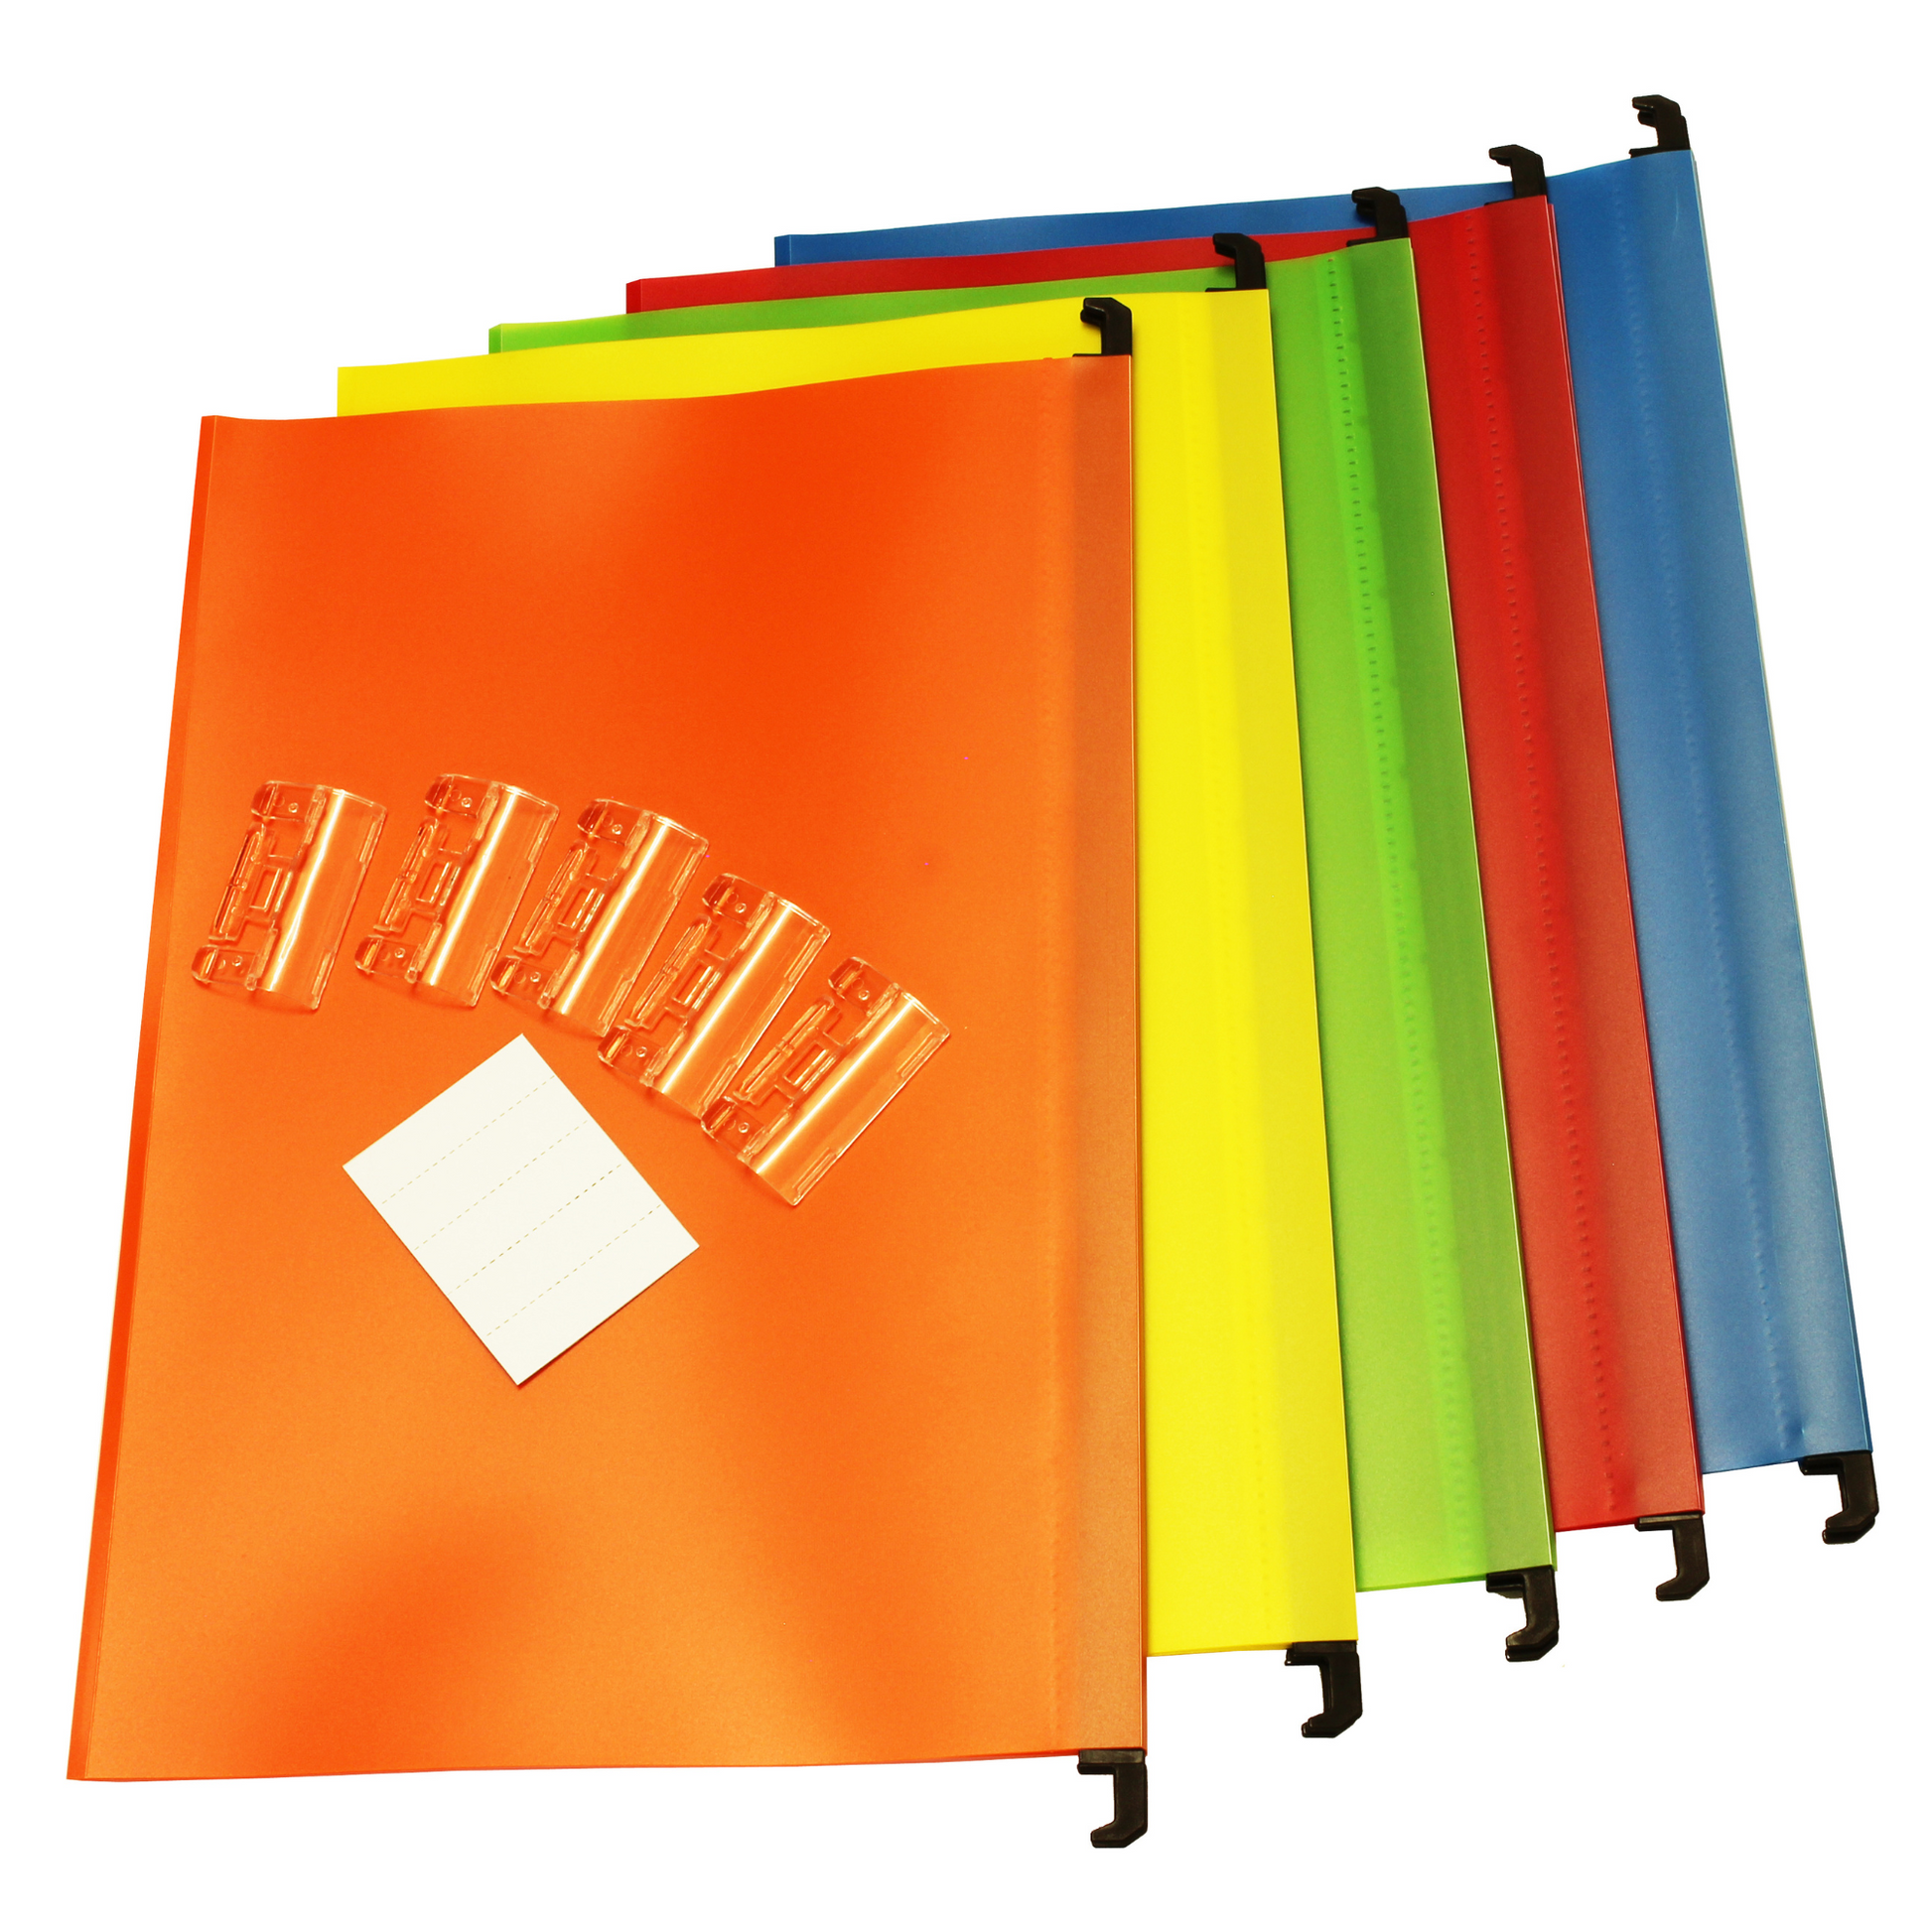 A pack of five brightly colored foolscap polypropylene suspension files fanned out, with colors including blue, red, green, orange, and yellow, each featuring a plastic tab for labelling, along with a perforated strip of inserts for the filing tabs.